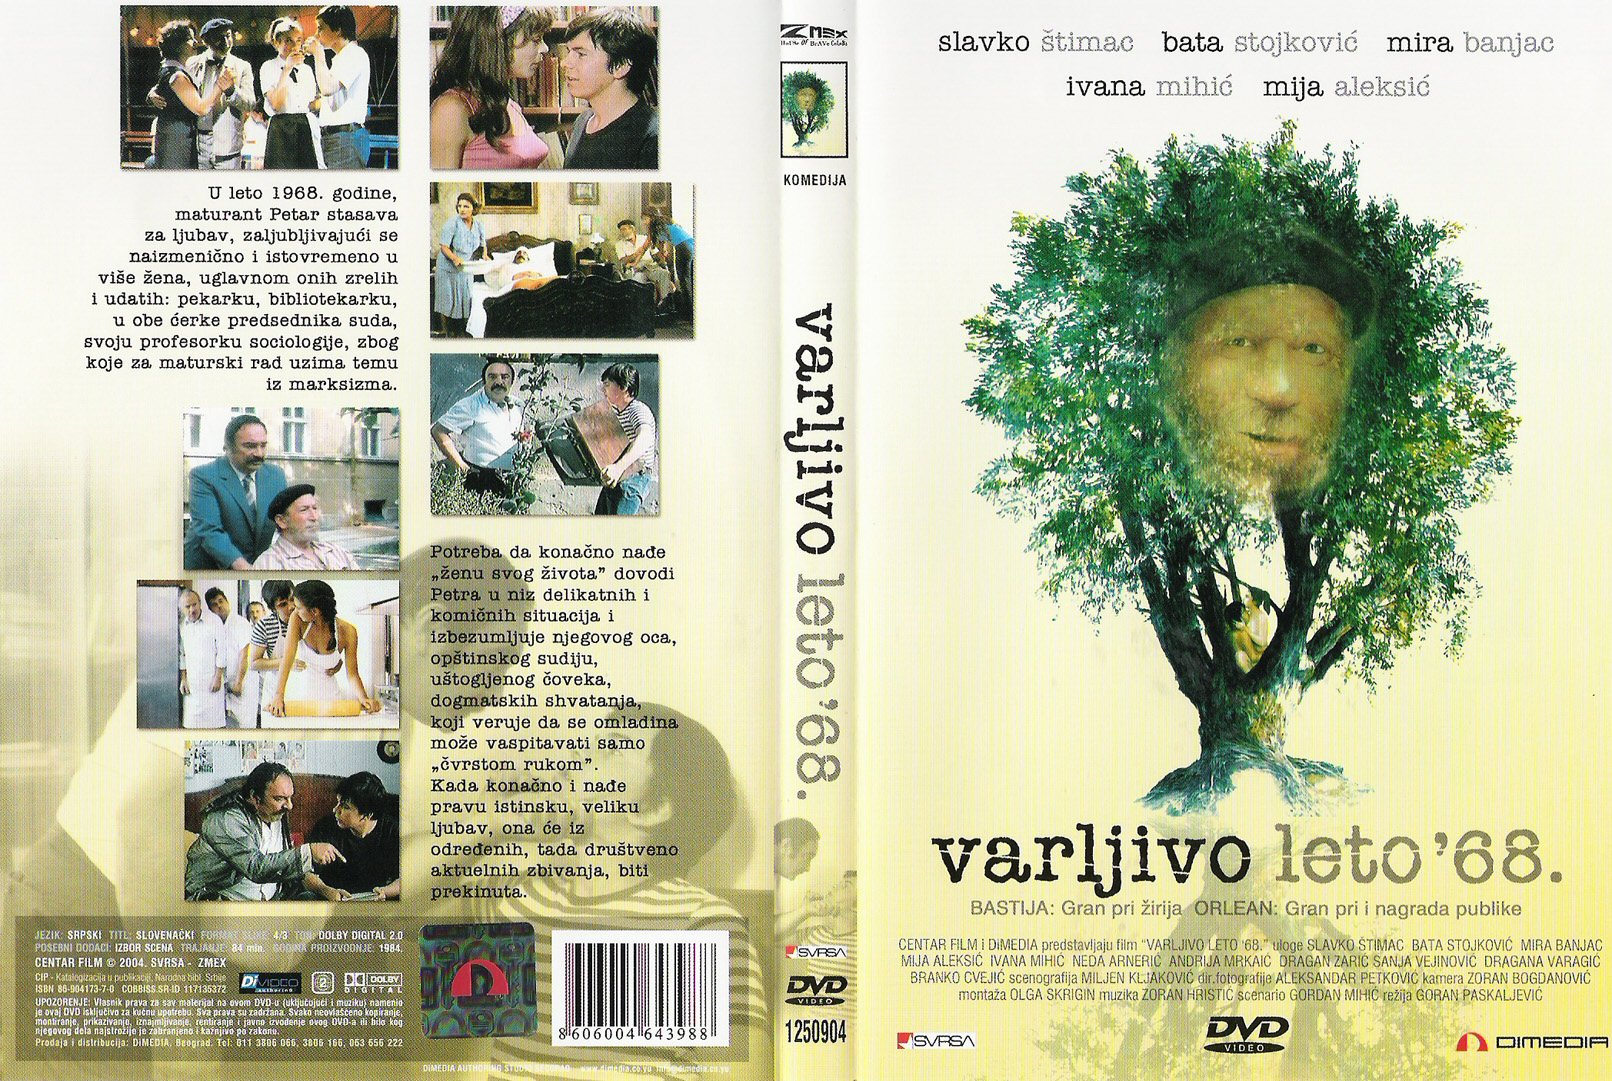 Click to view full size image -  DVD Cover - V - varljivo_ljeto_68_dvd - varljivo_ljeto_68_dvd.jpg